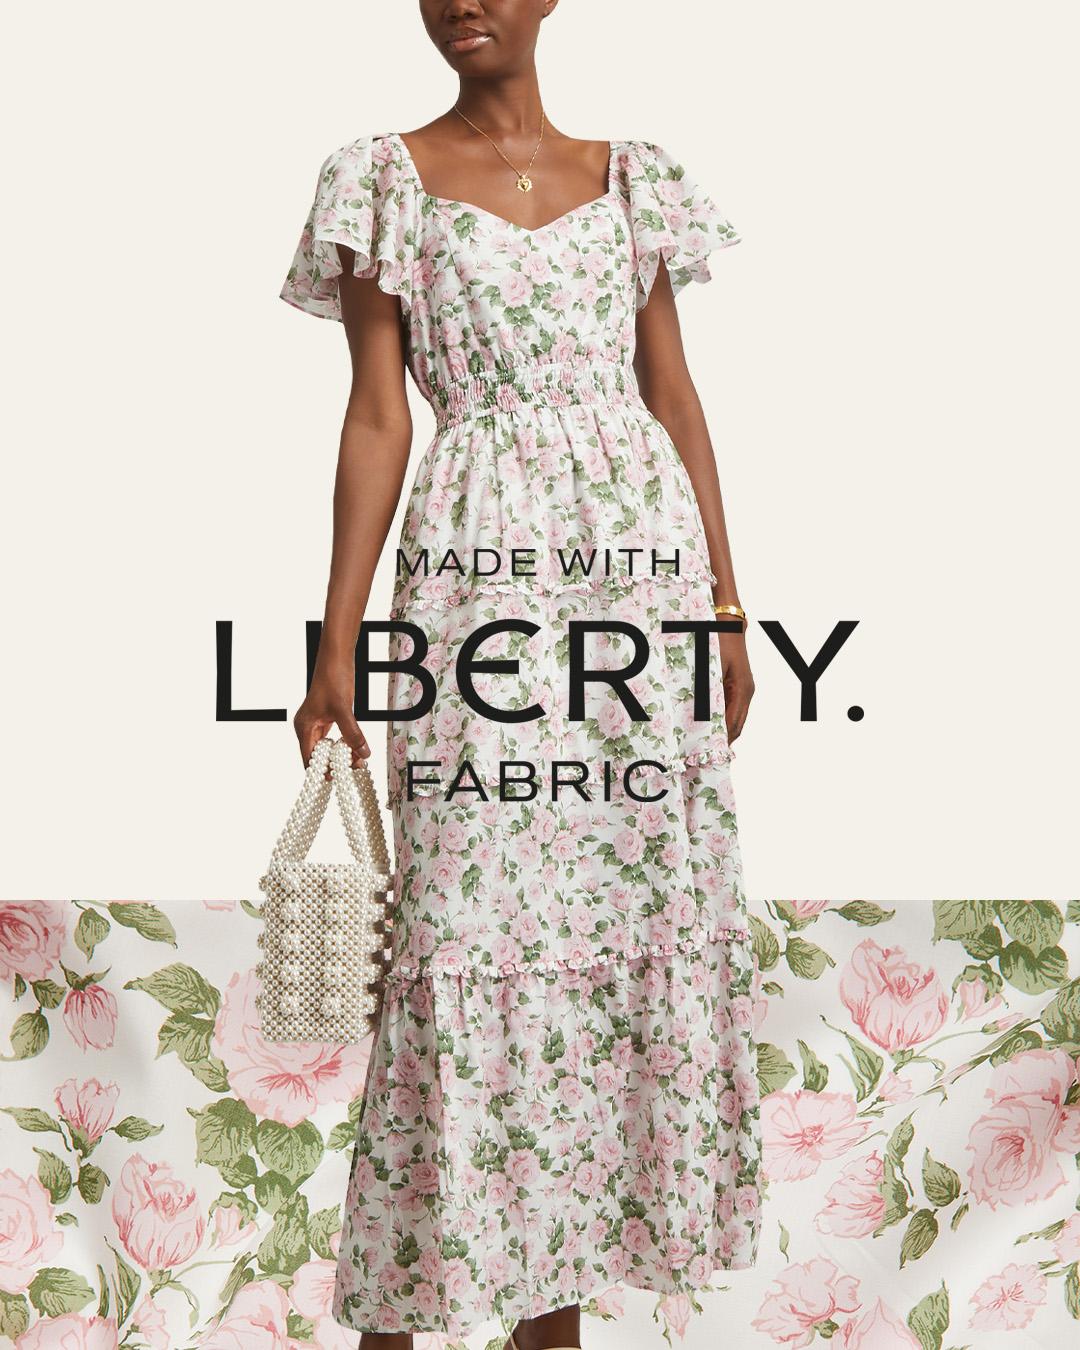 LoveShackFancy's New 'Made with Liberty Fabrics' Collection | Liberty